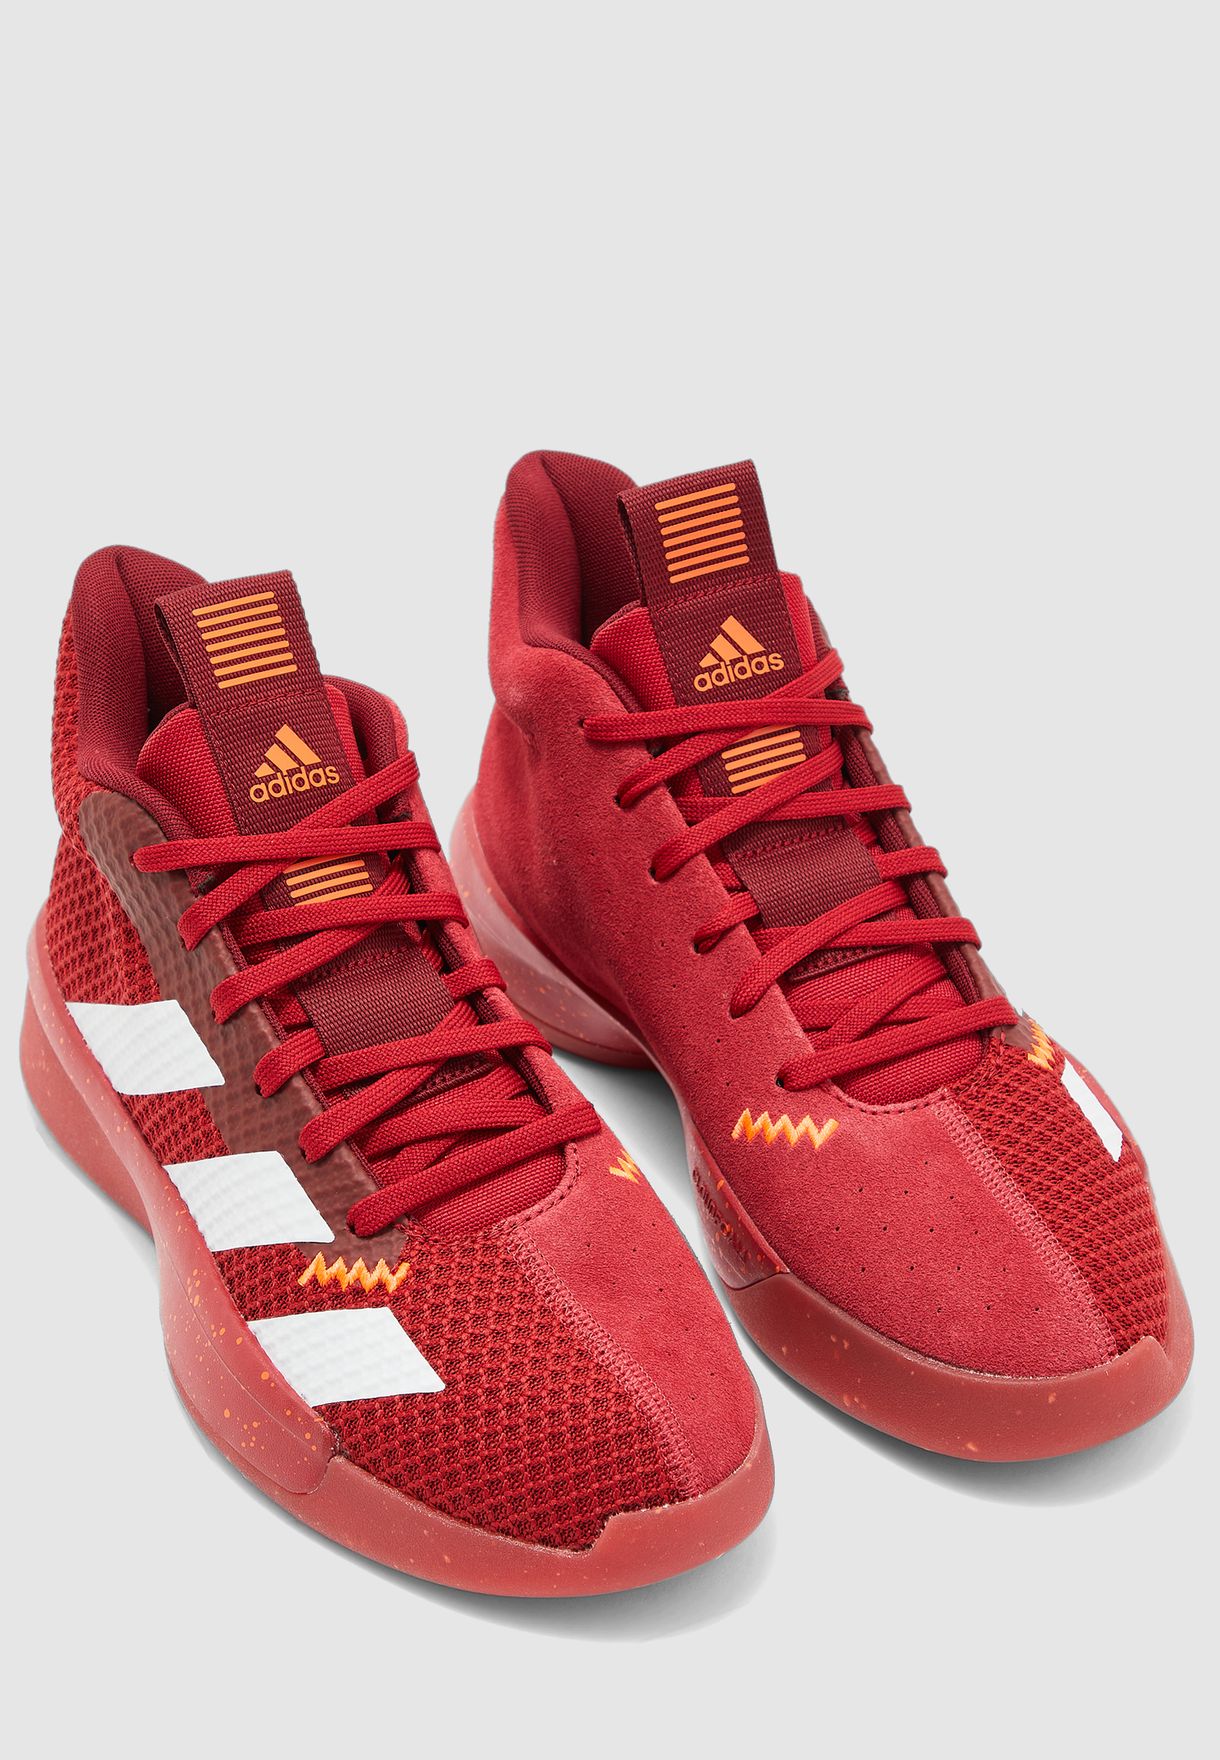 Buy adidas red Pro Next 2019 for Men in 